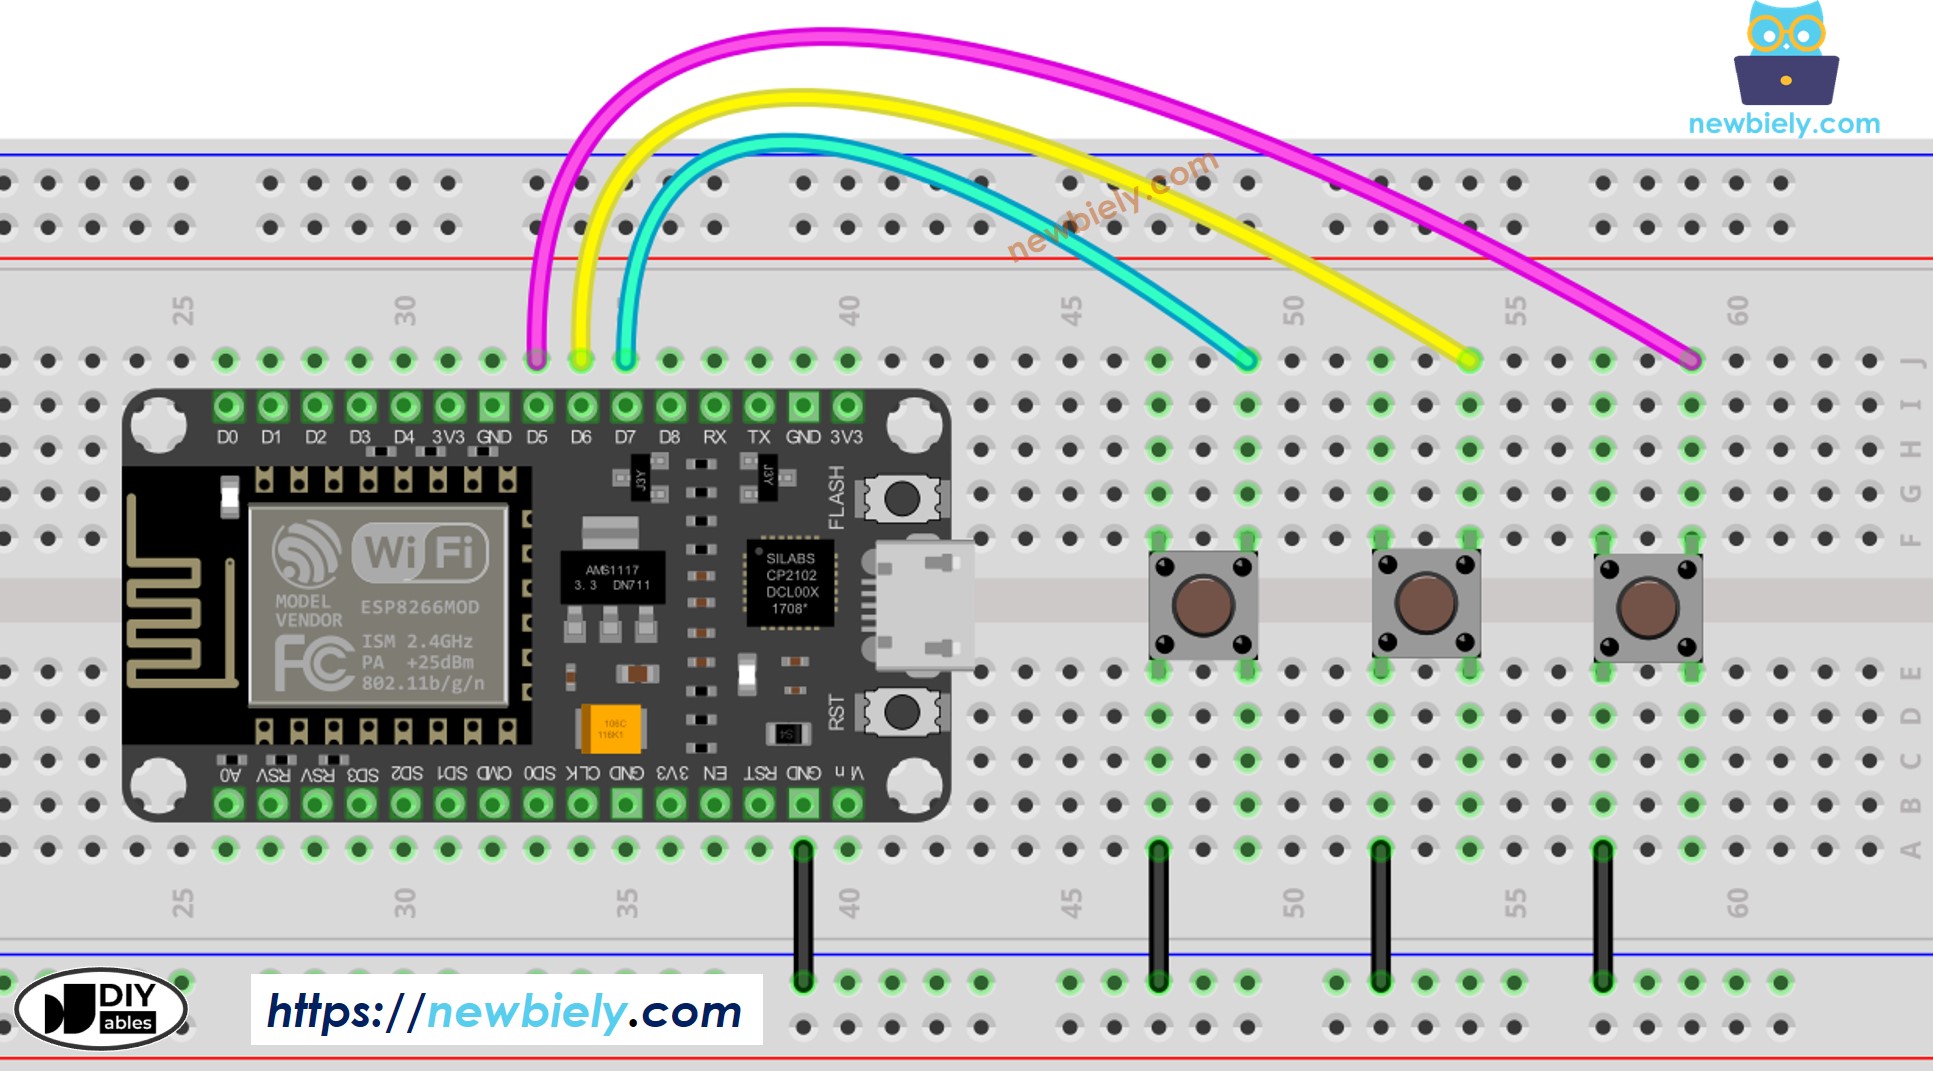 The wiring diagram between ESP8266 NodeMCU and multiple button